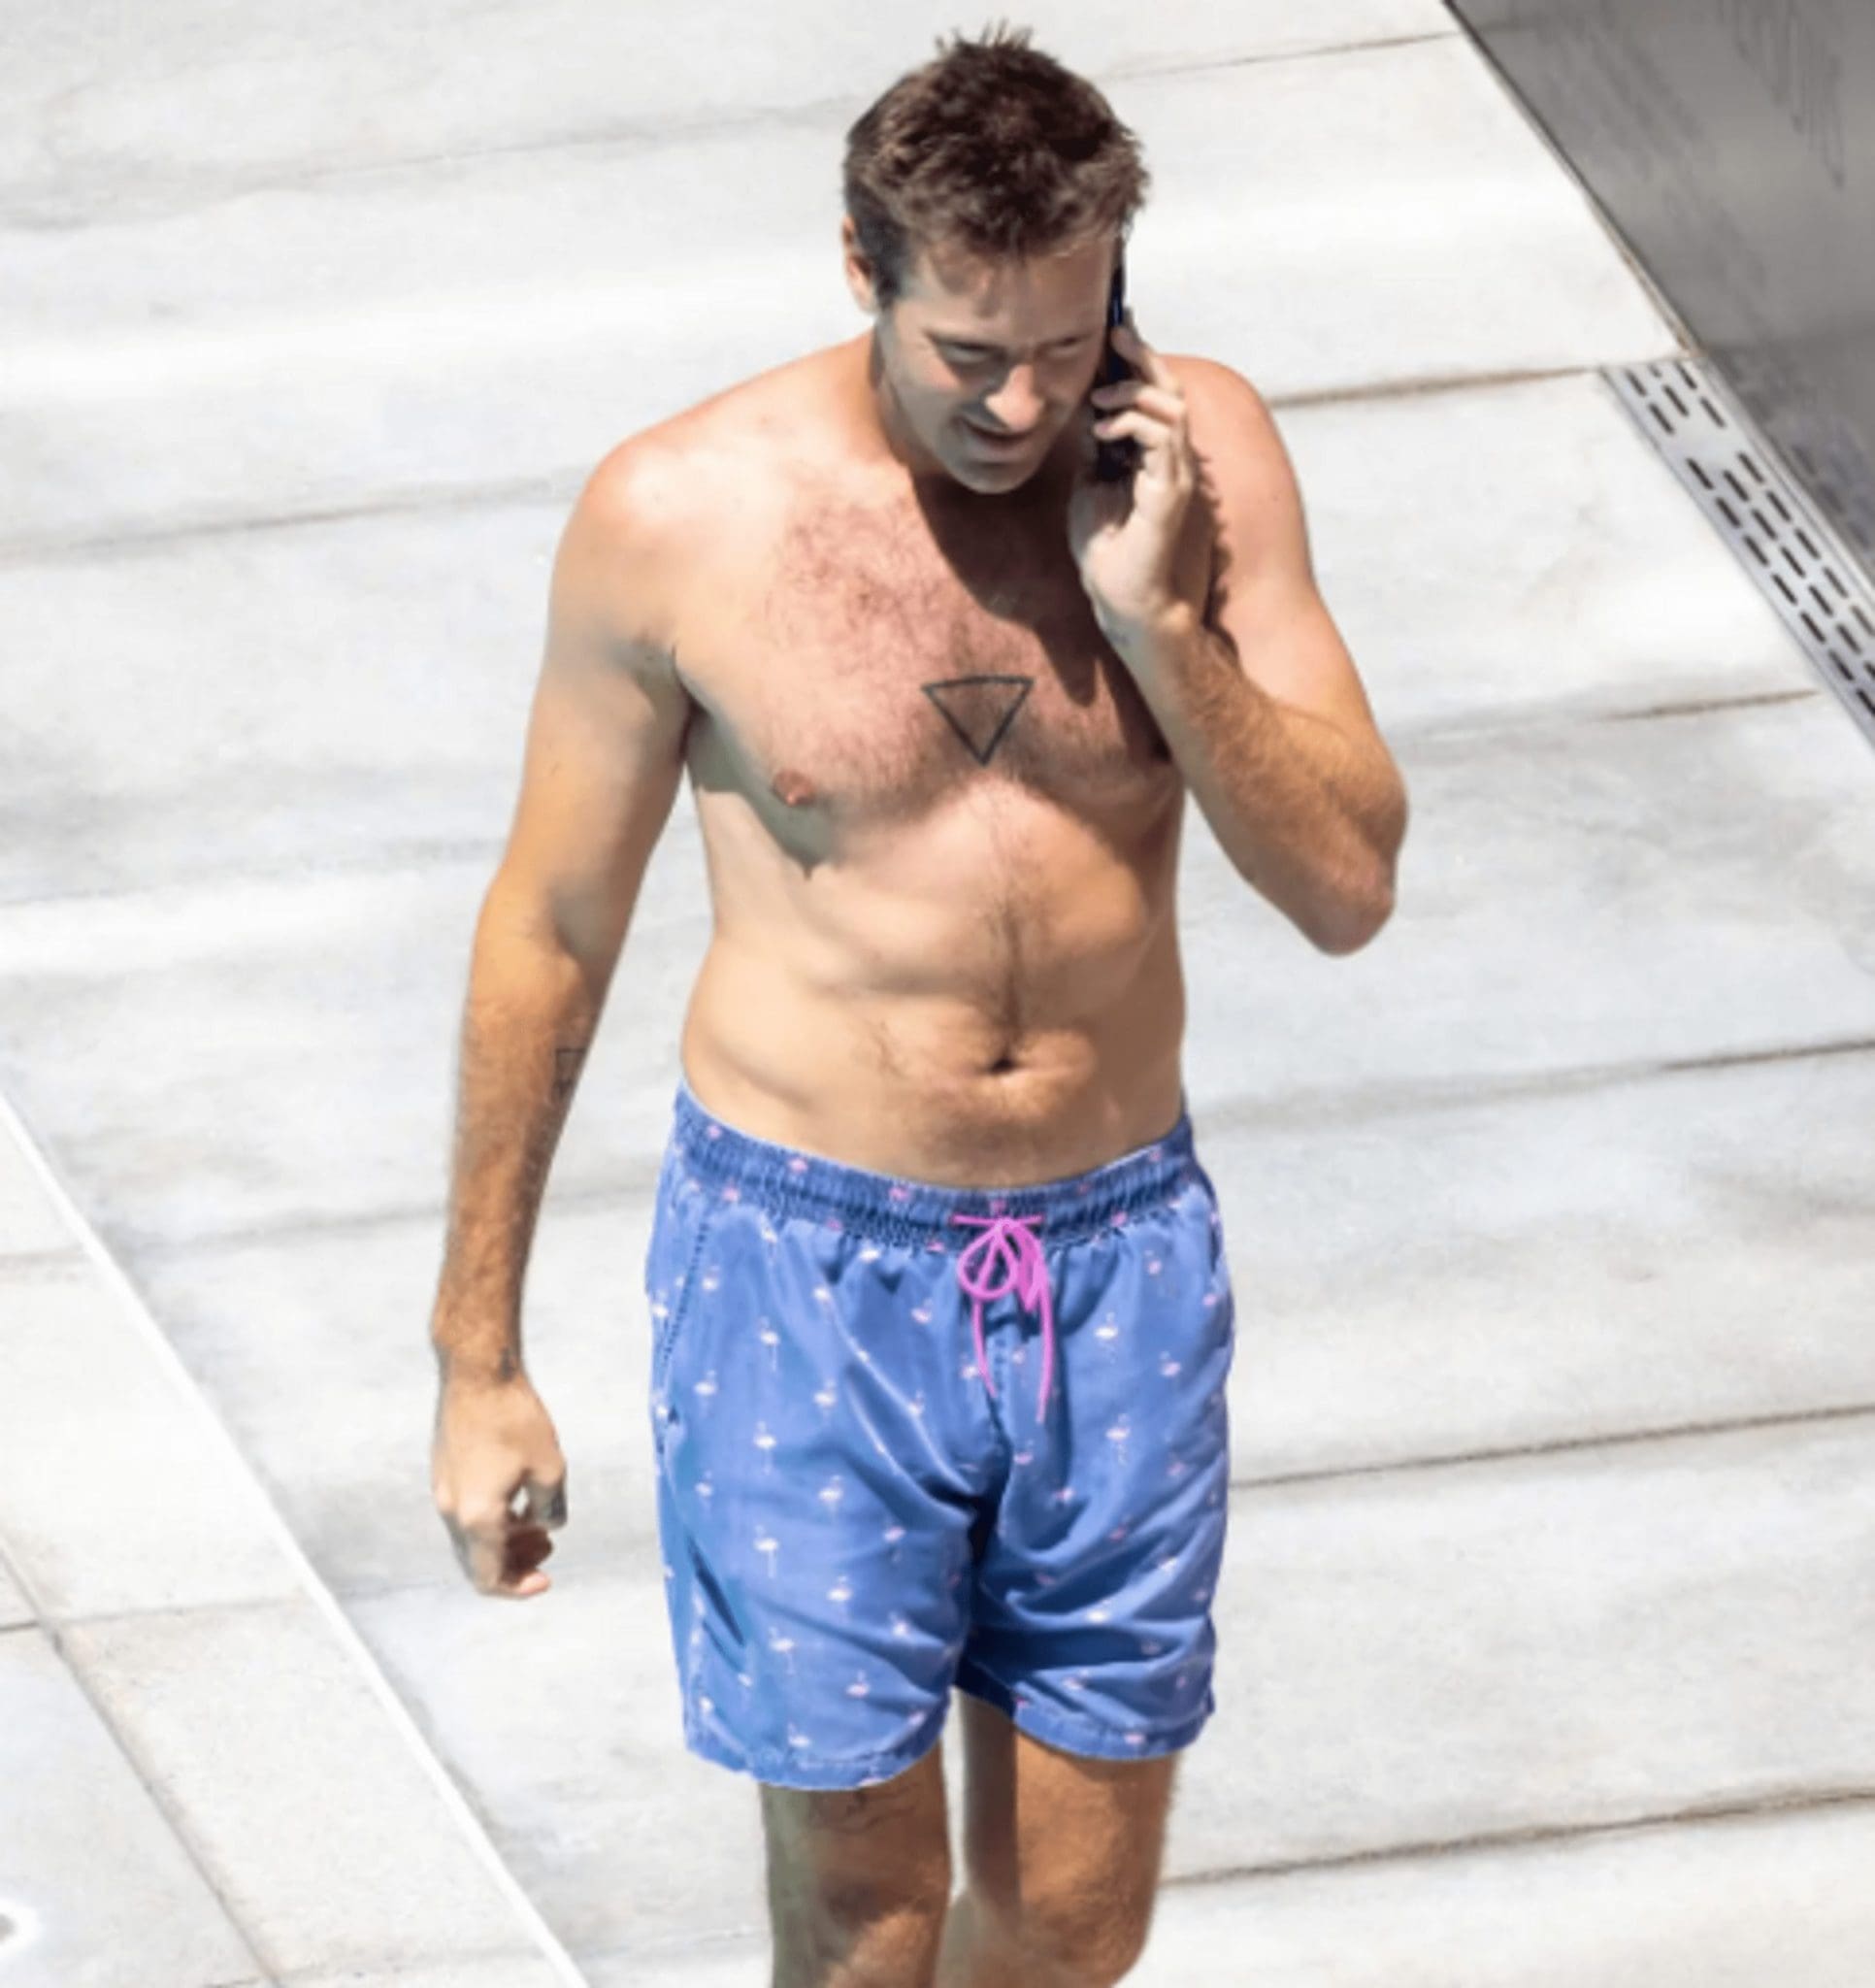 In a Southern California hotel, Armie Hammer was photographed by the pool with some fresh piercings on his arm and chest